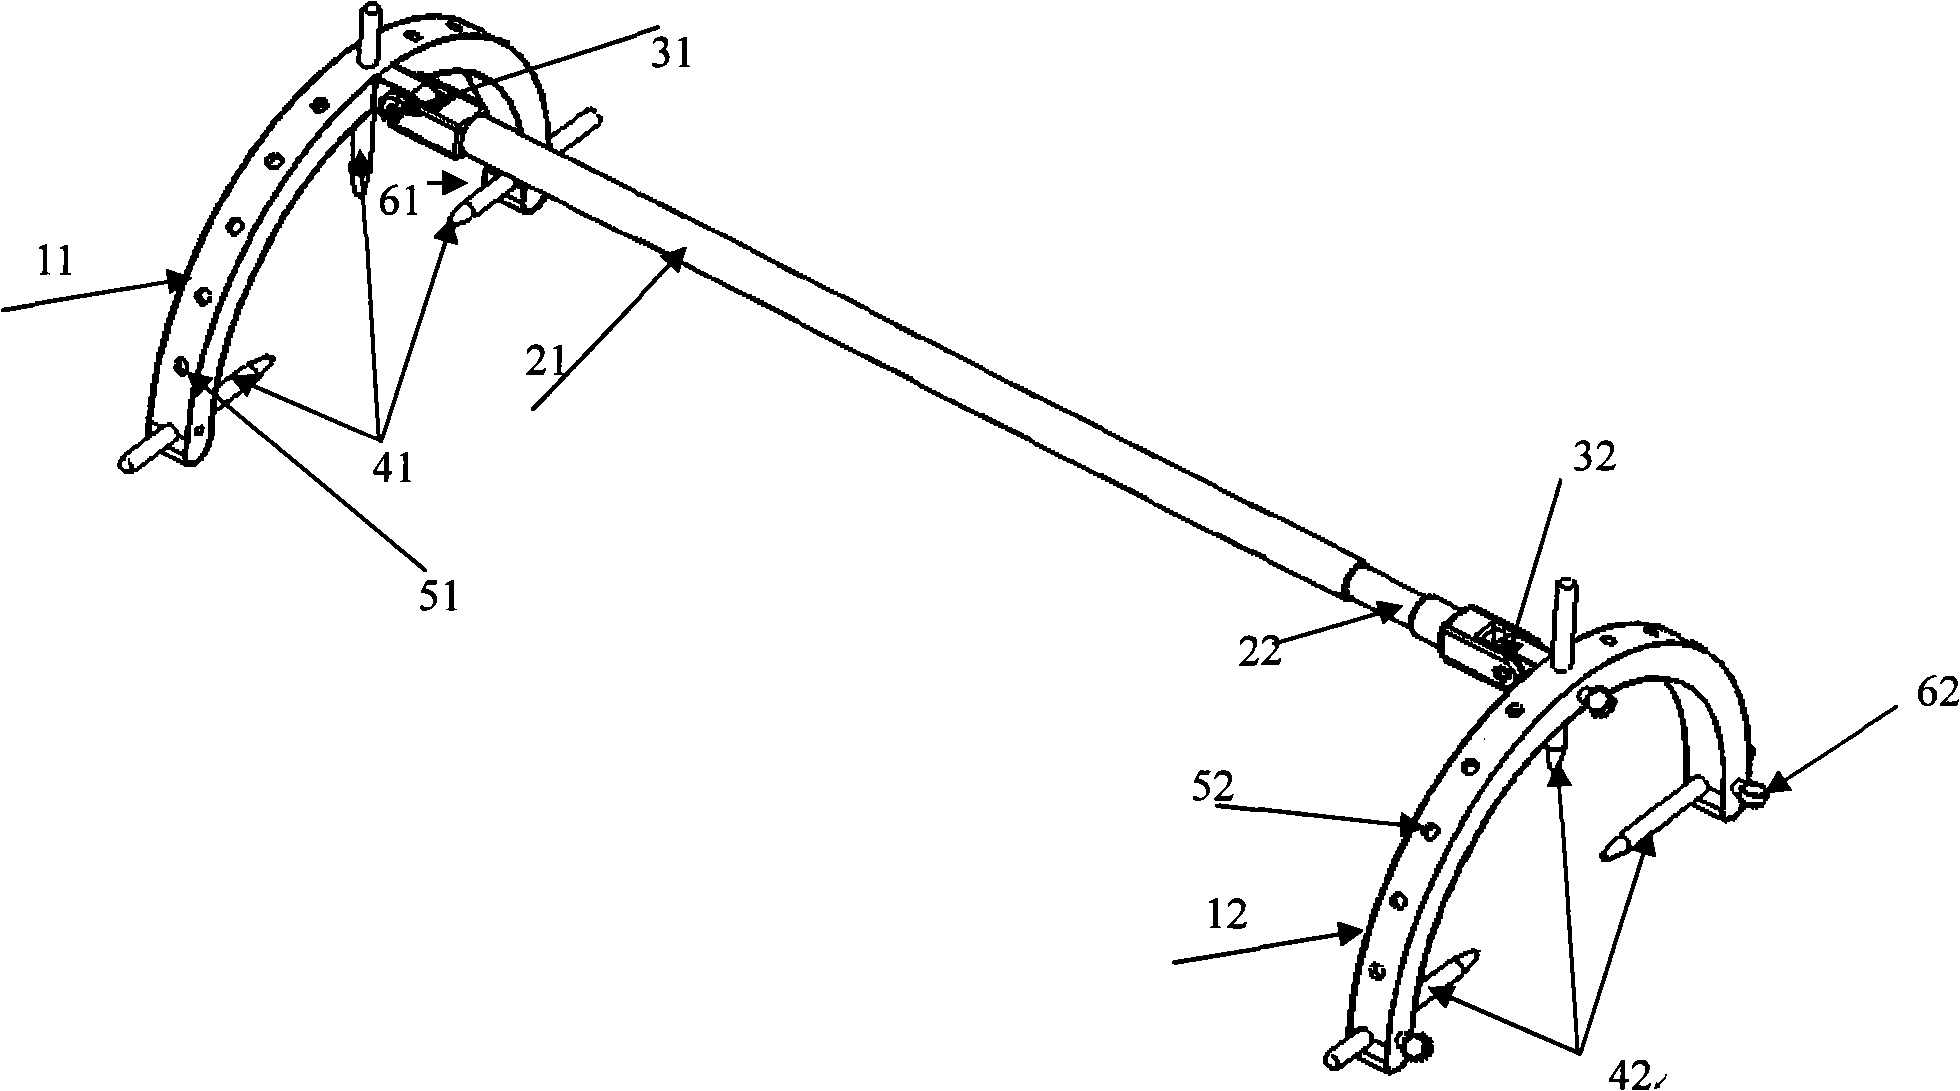 Measurement scaling rack for determining human lower-limb axis